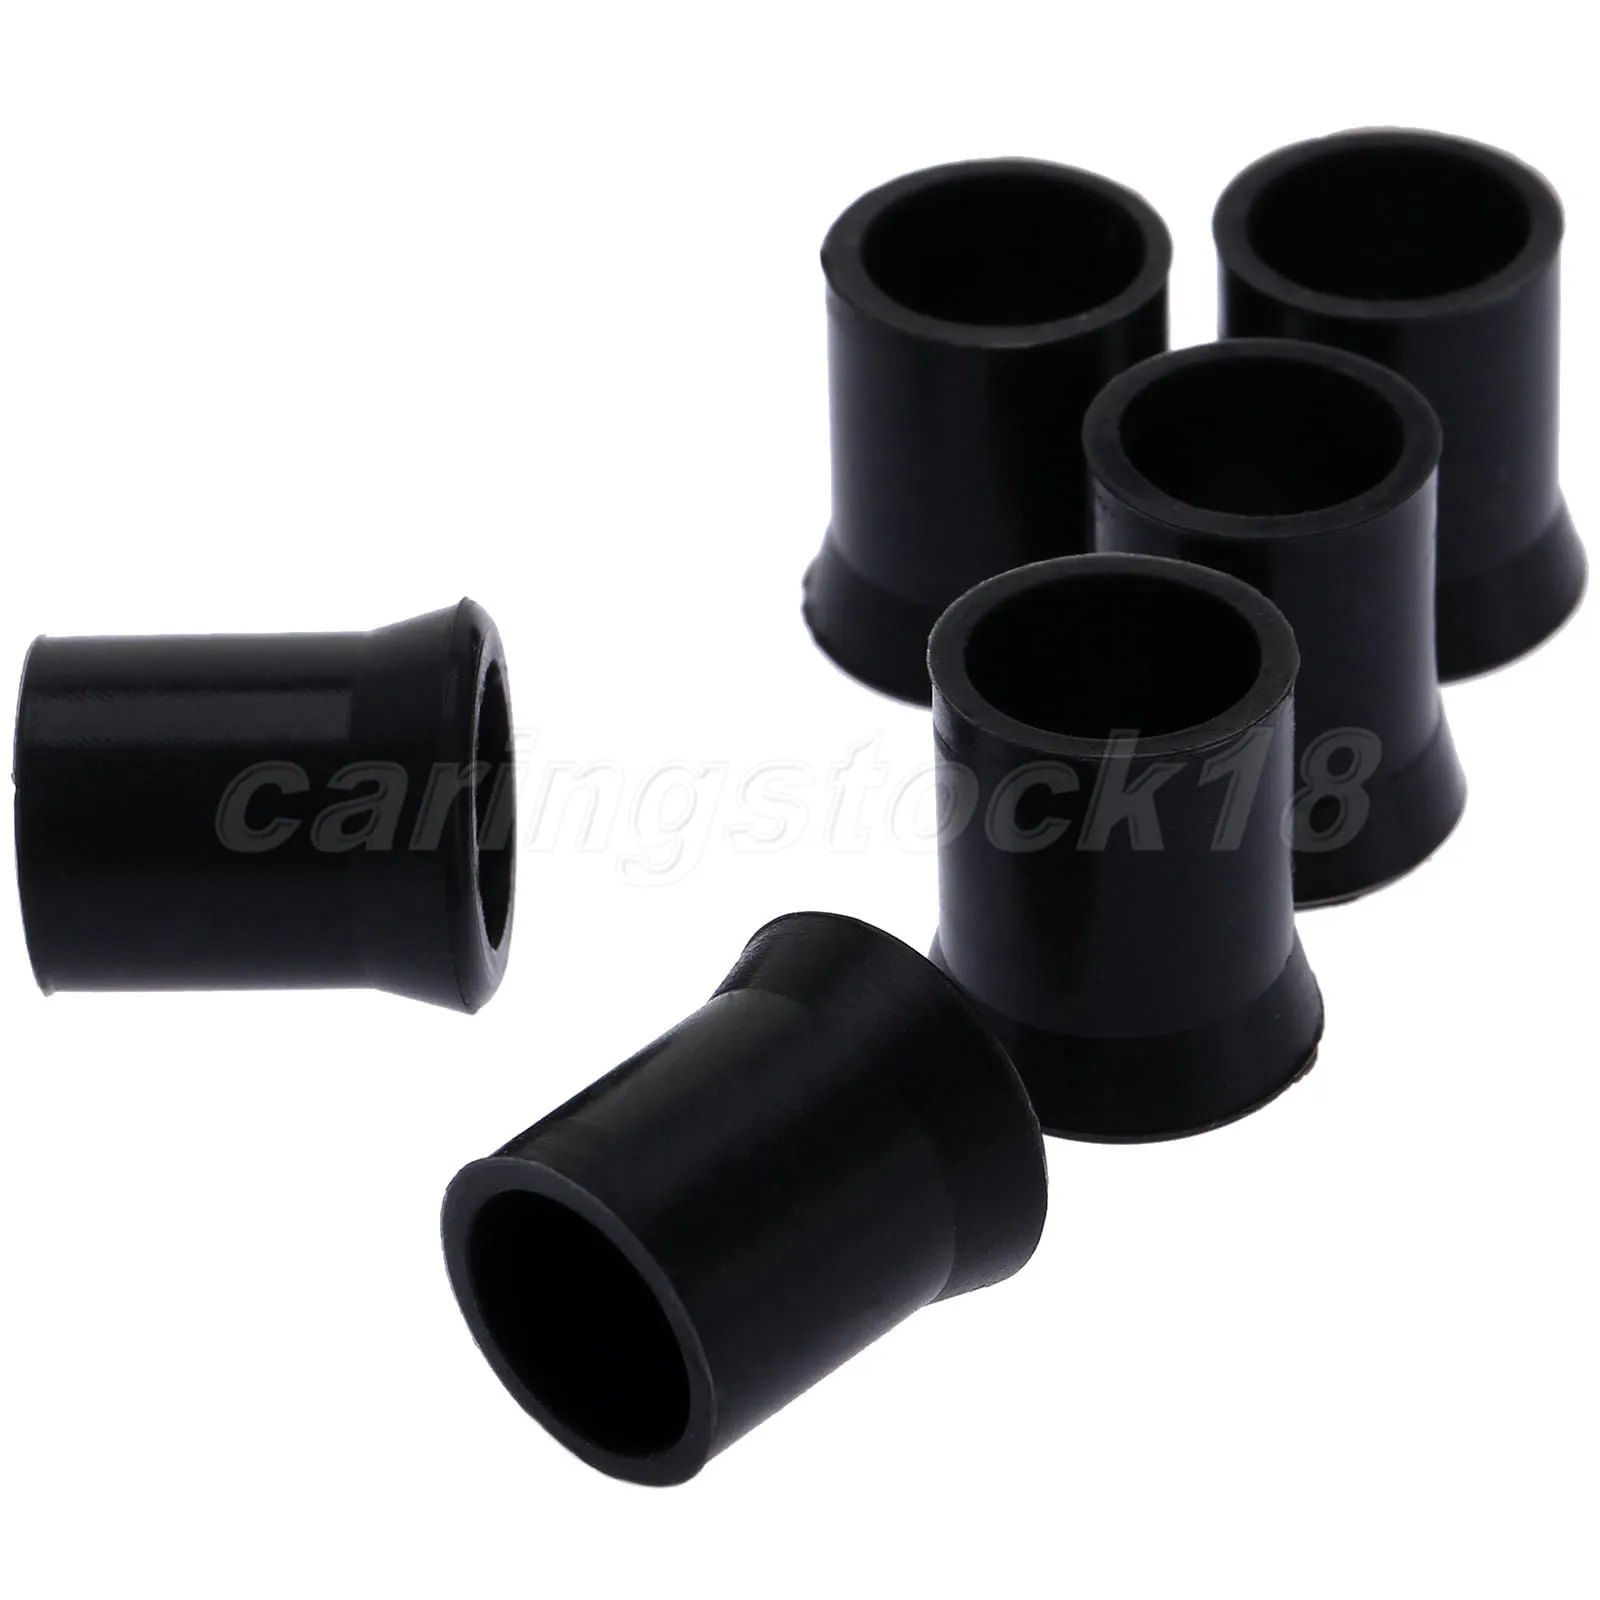 10x Inner Dia 11mm Soft Rubber Tobacco Smoking Pipe Tip Grips Black Comfort Tool 